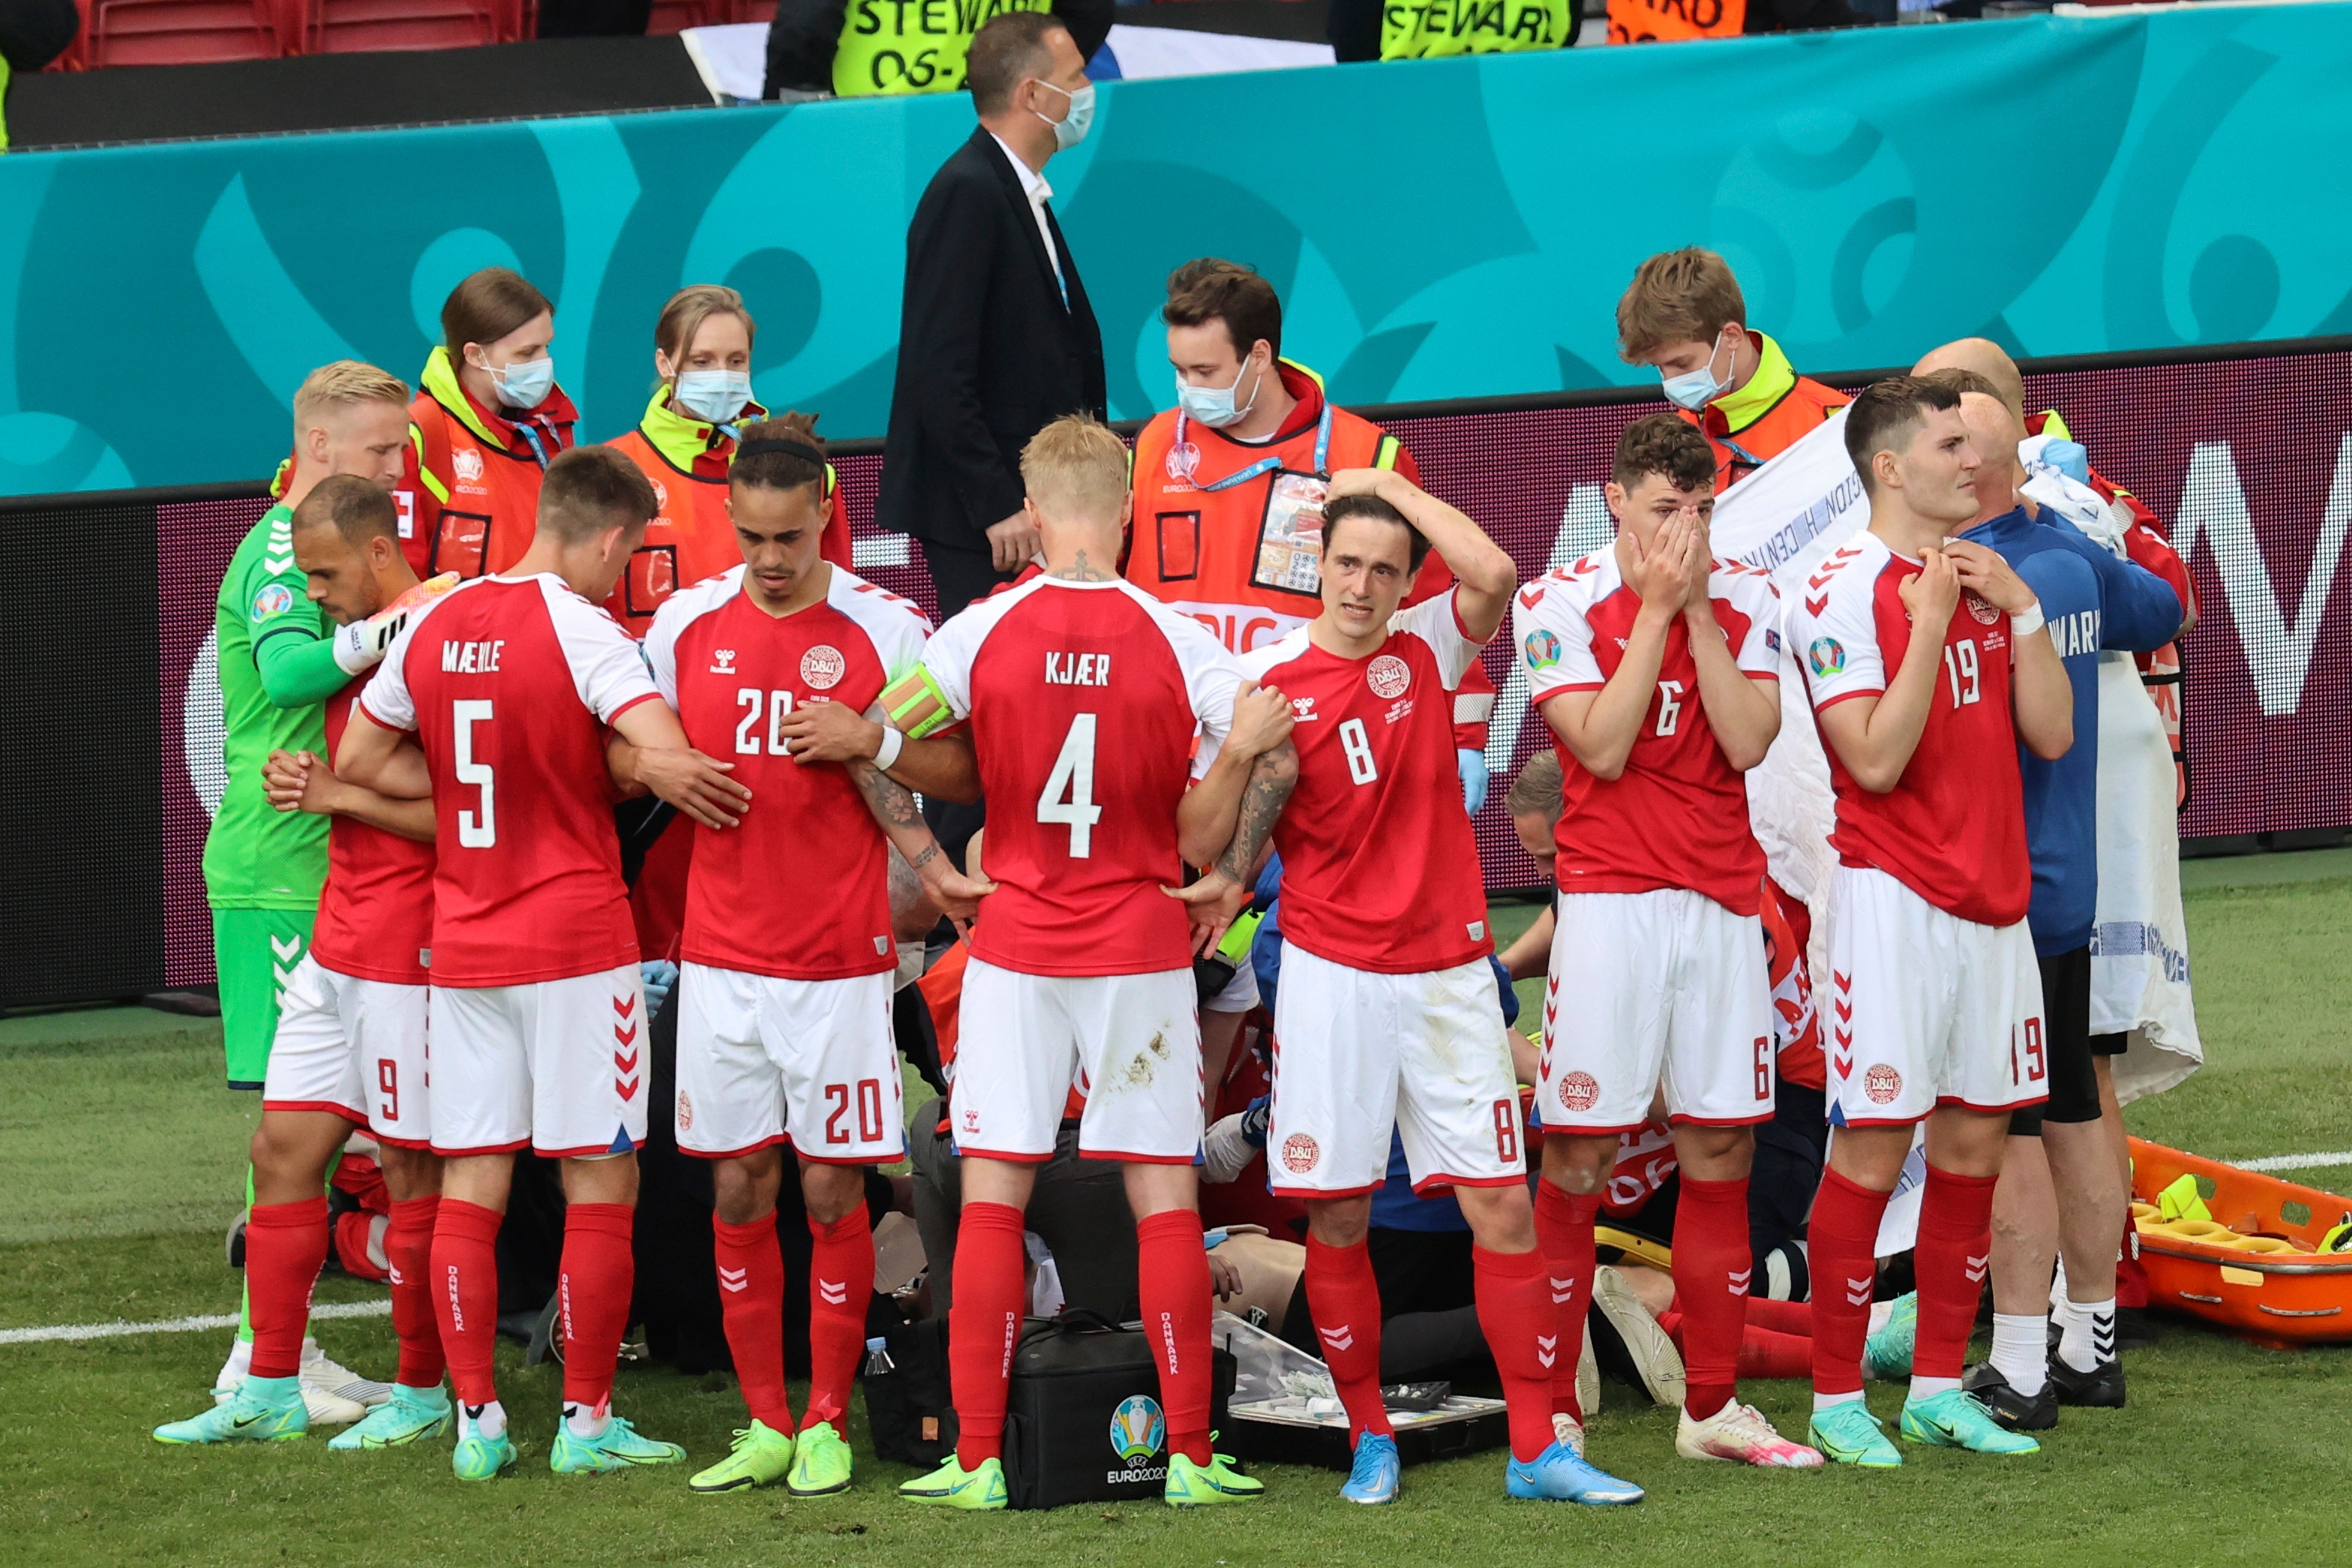 Denmark are back in action for the first time since their harrowing experience at the weekend